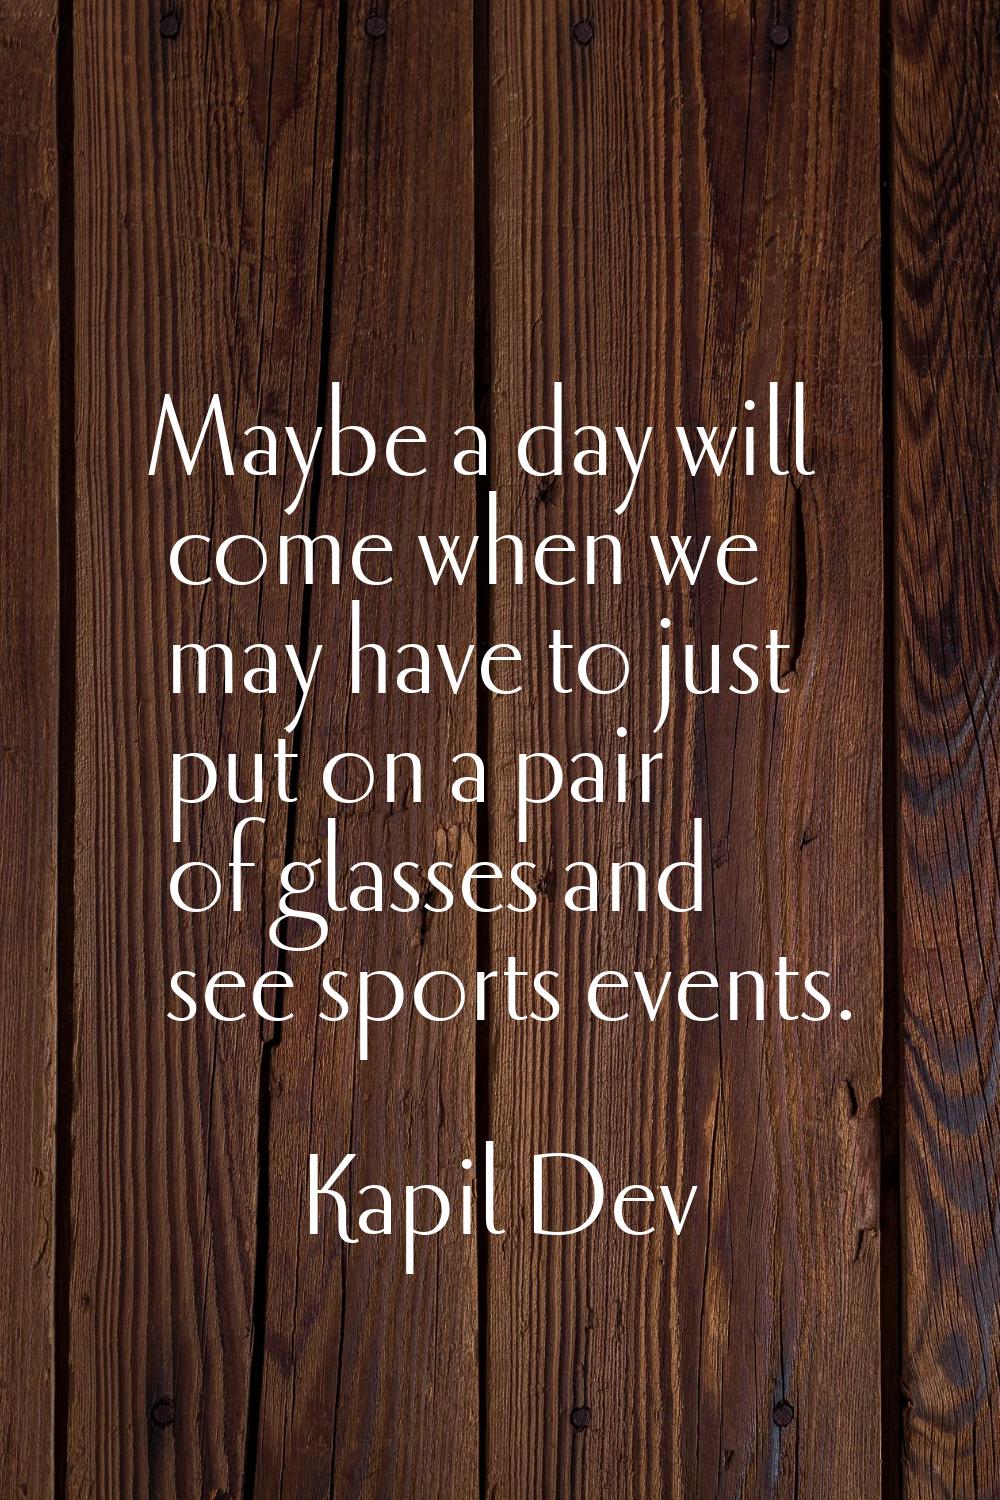 Maybe a day will come when we may have to just put on a pair of glasses and see sports events.